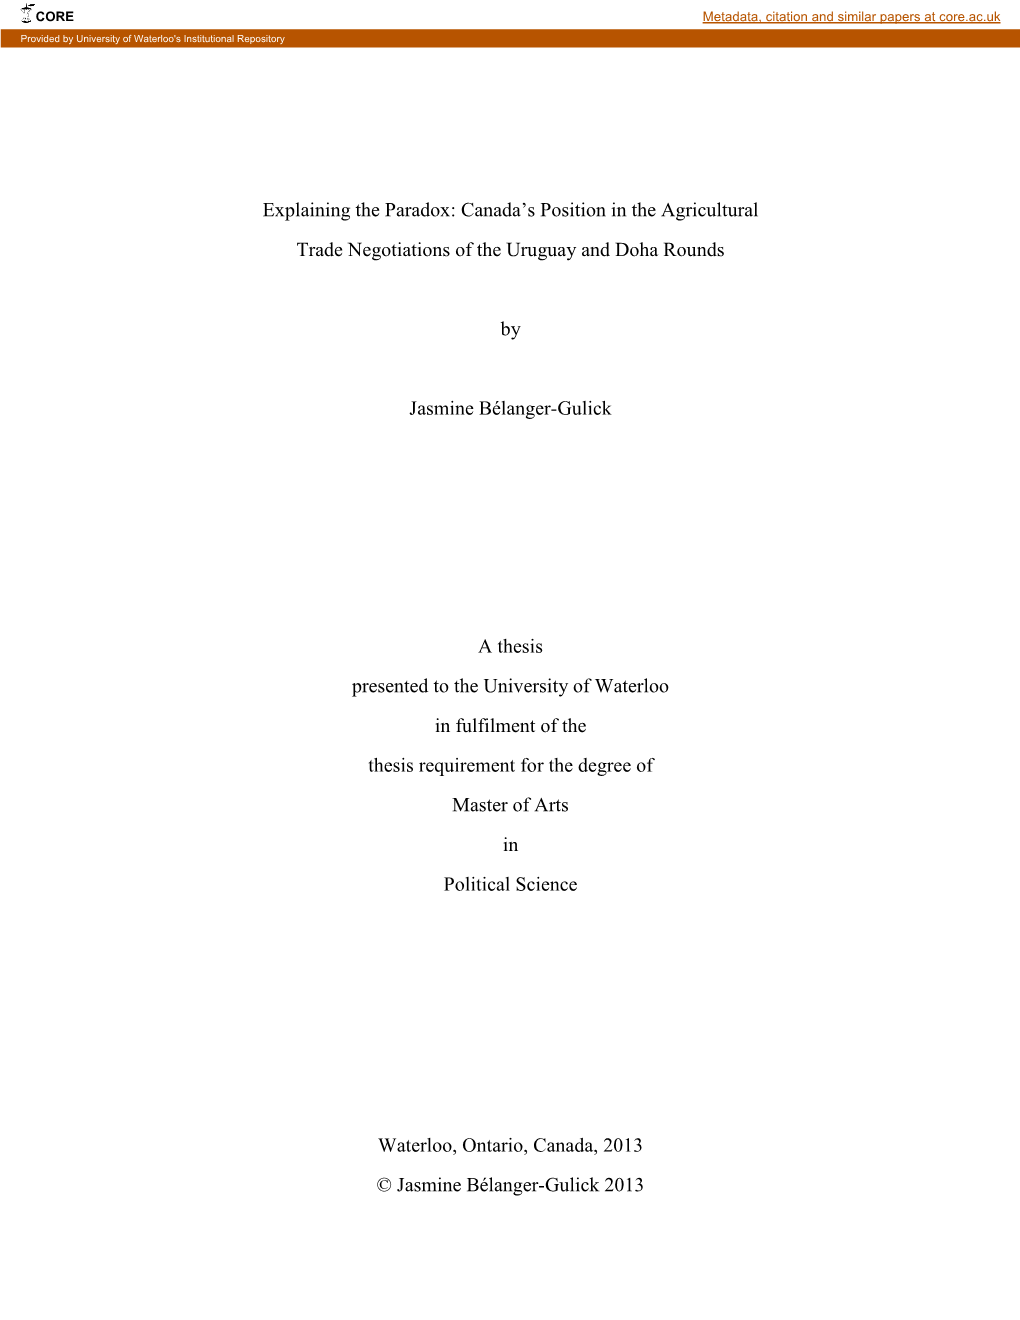 Explaining the Paradox: Canada’S Position in the Agricultural Trade Negotiations of the Uruguay and Doha Rounds